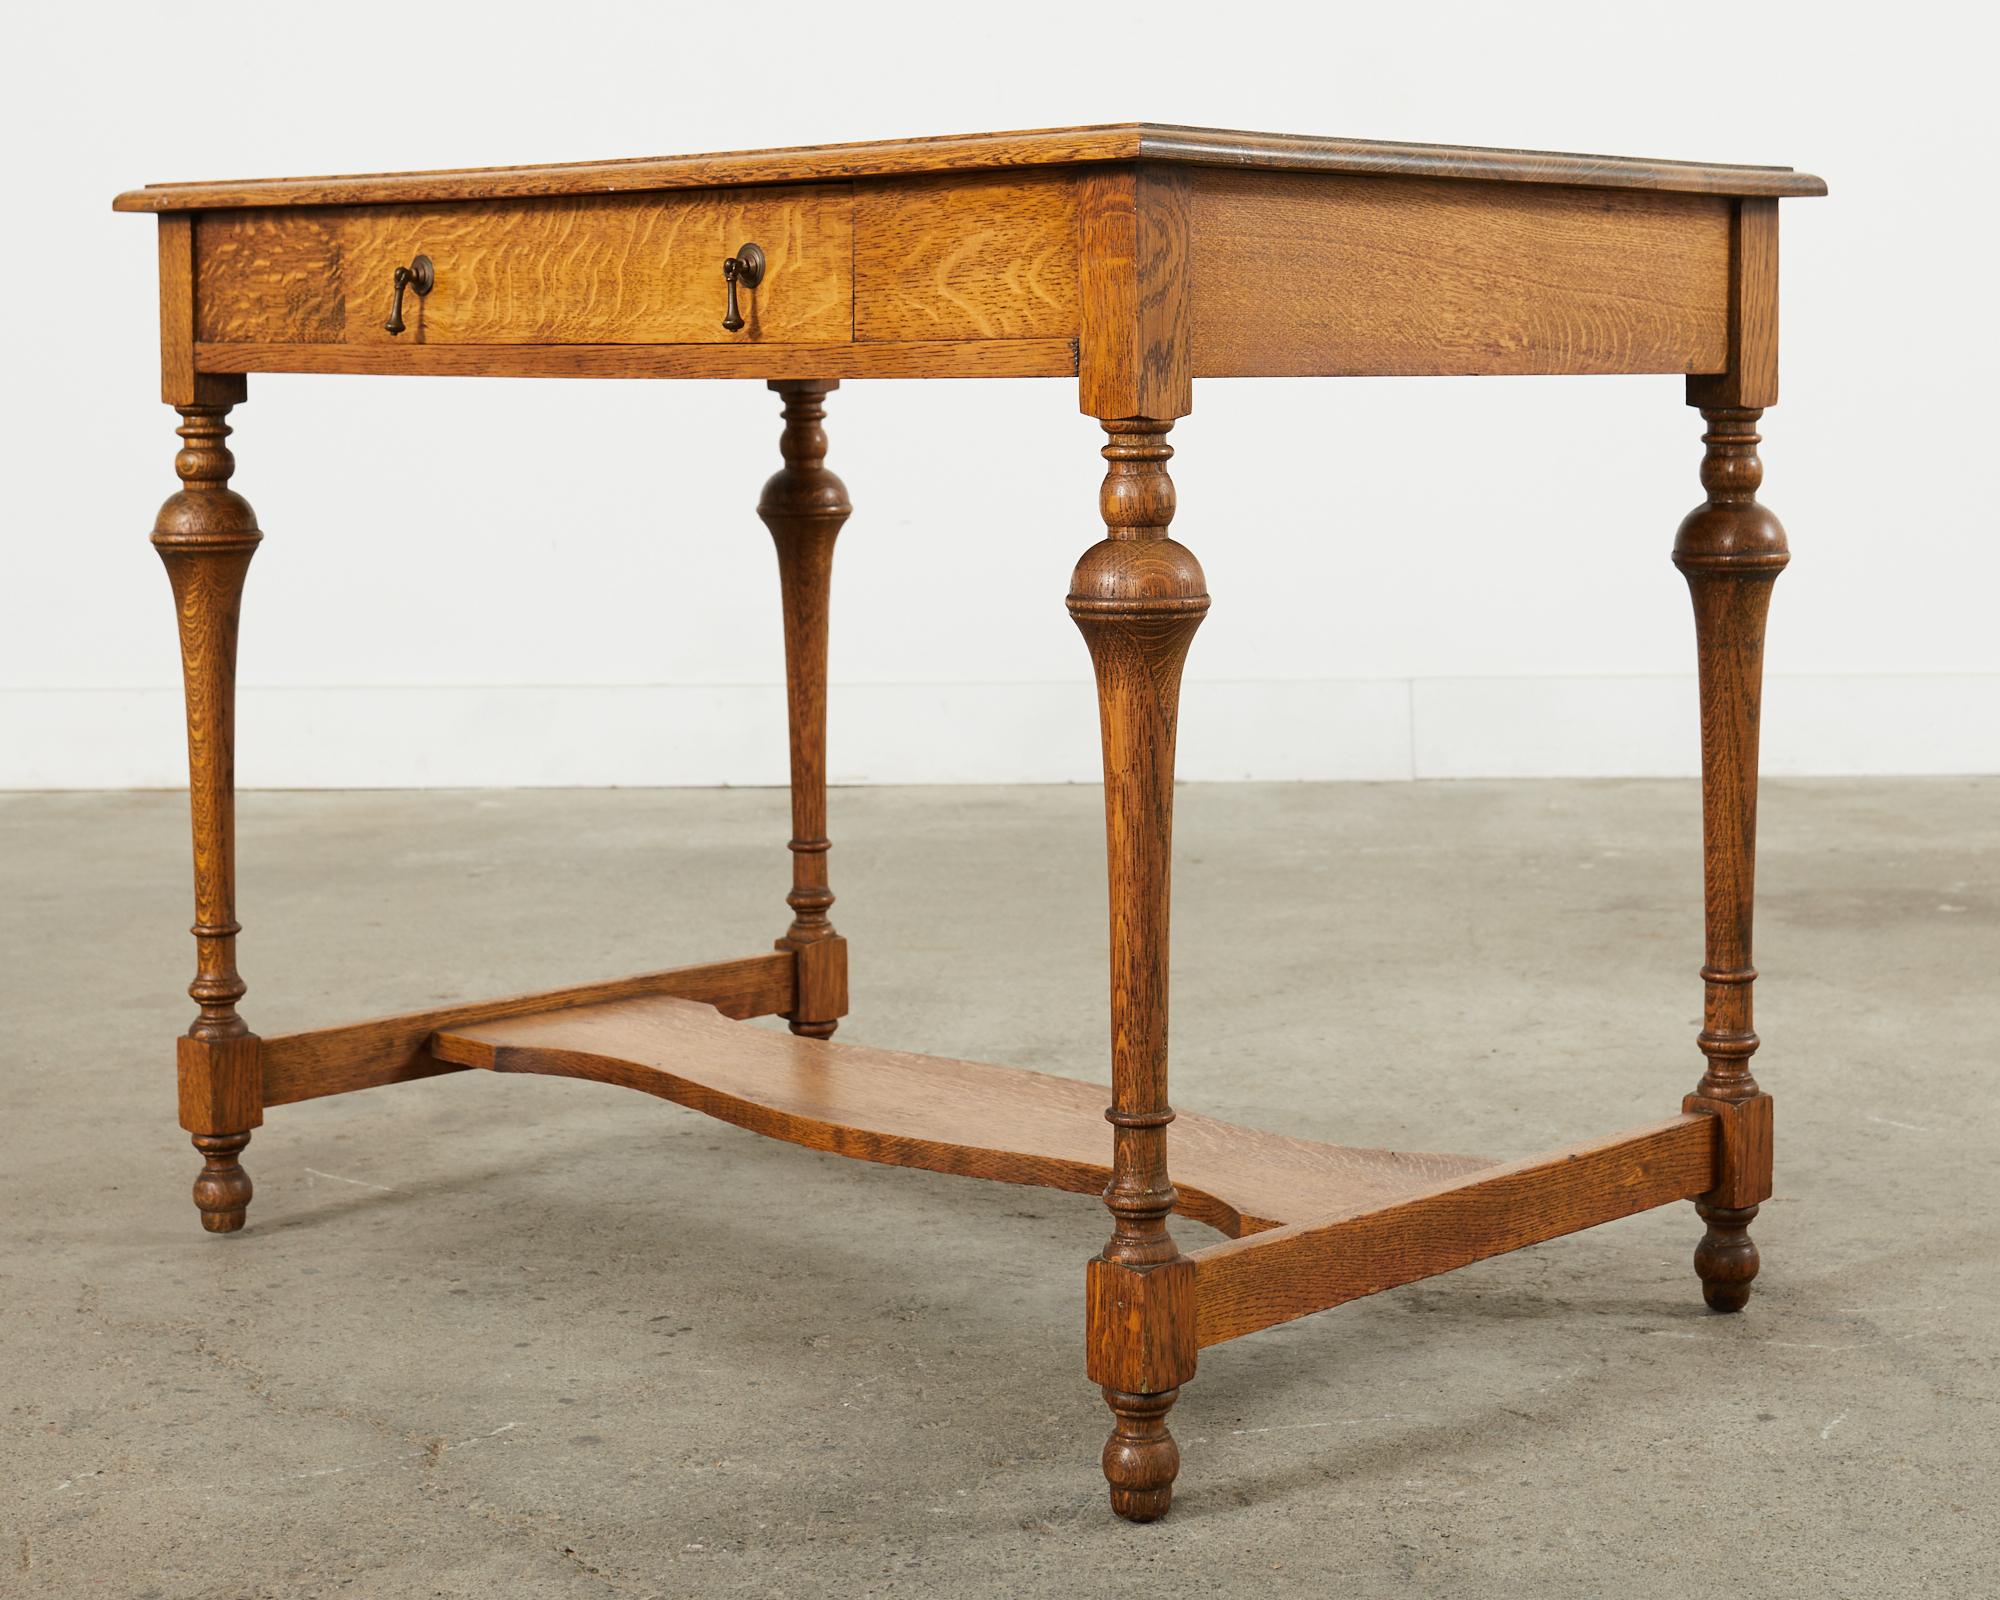 Hand-Crafted English Edwardian Quarter Sawn Oak Library Table Desk